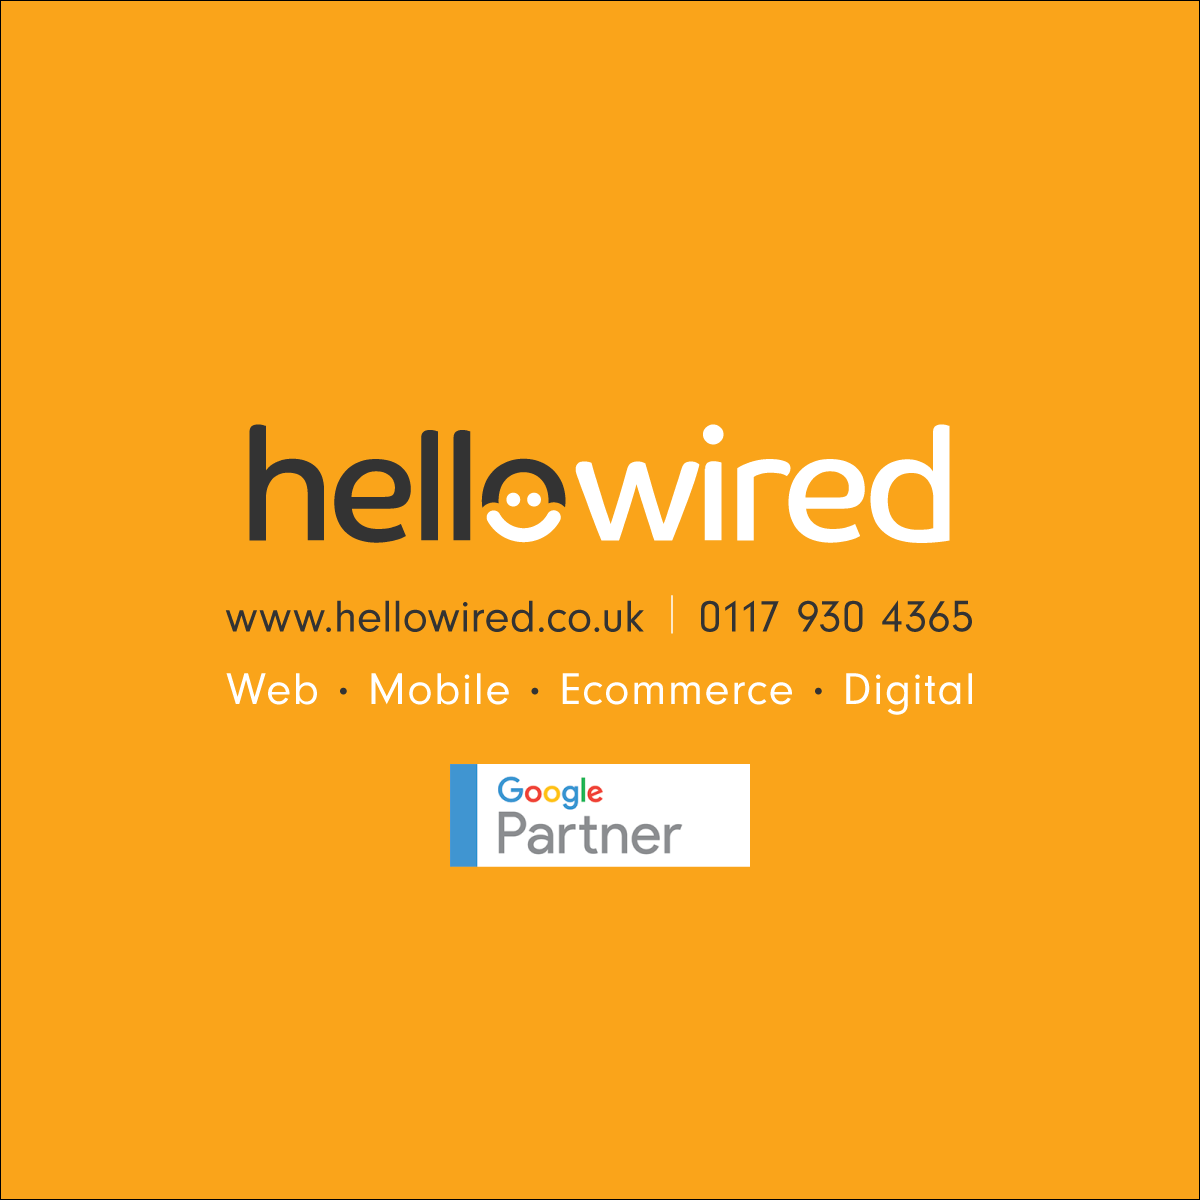 (c) Hellowired.co.uk